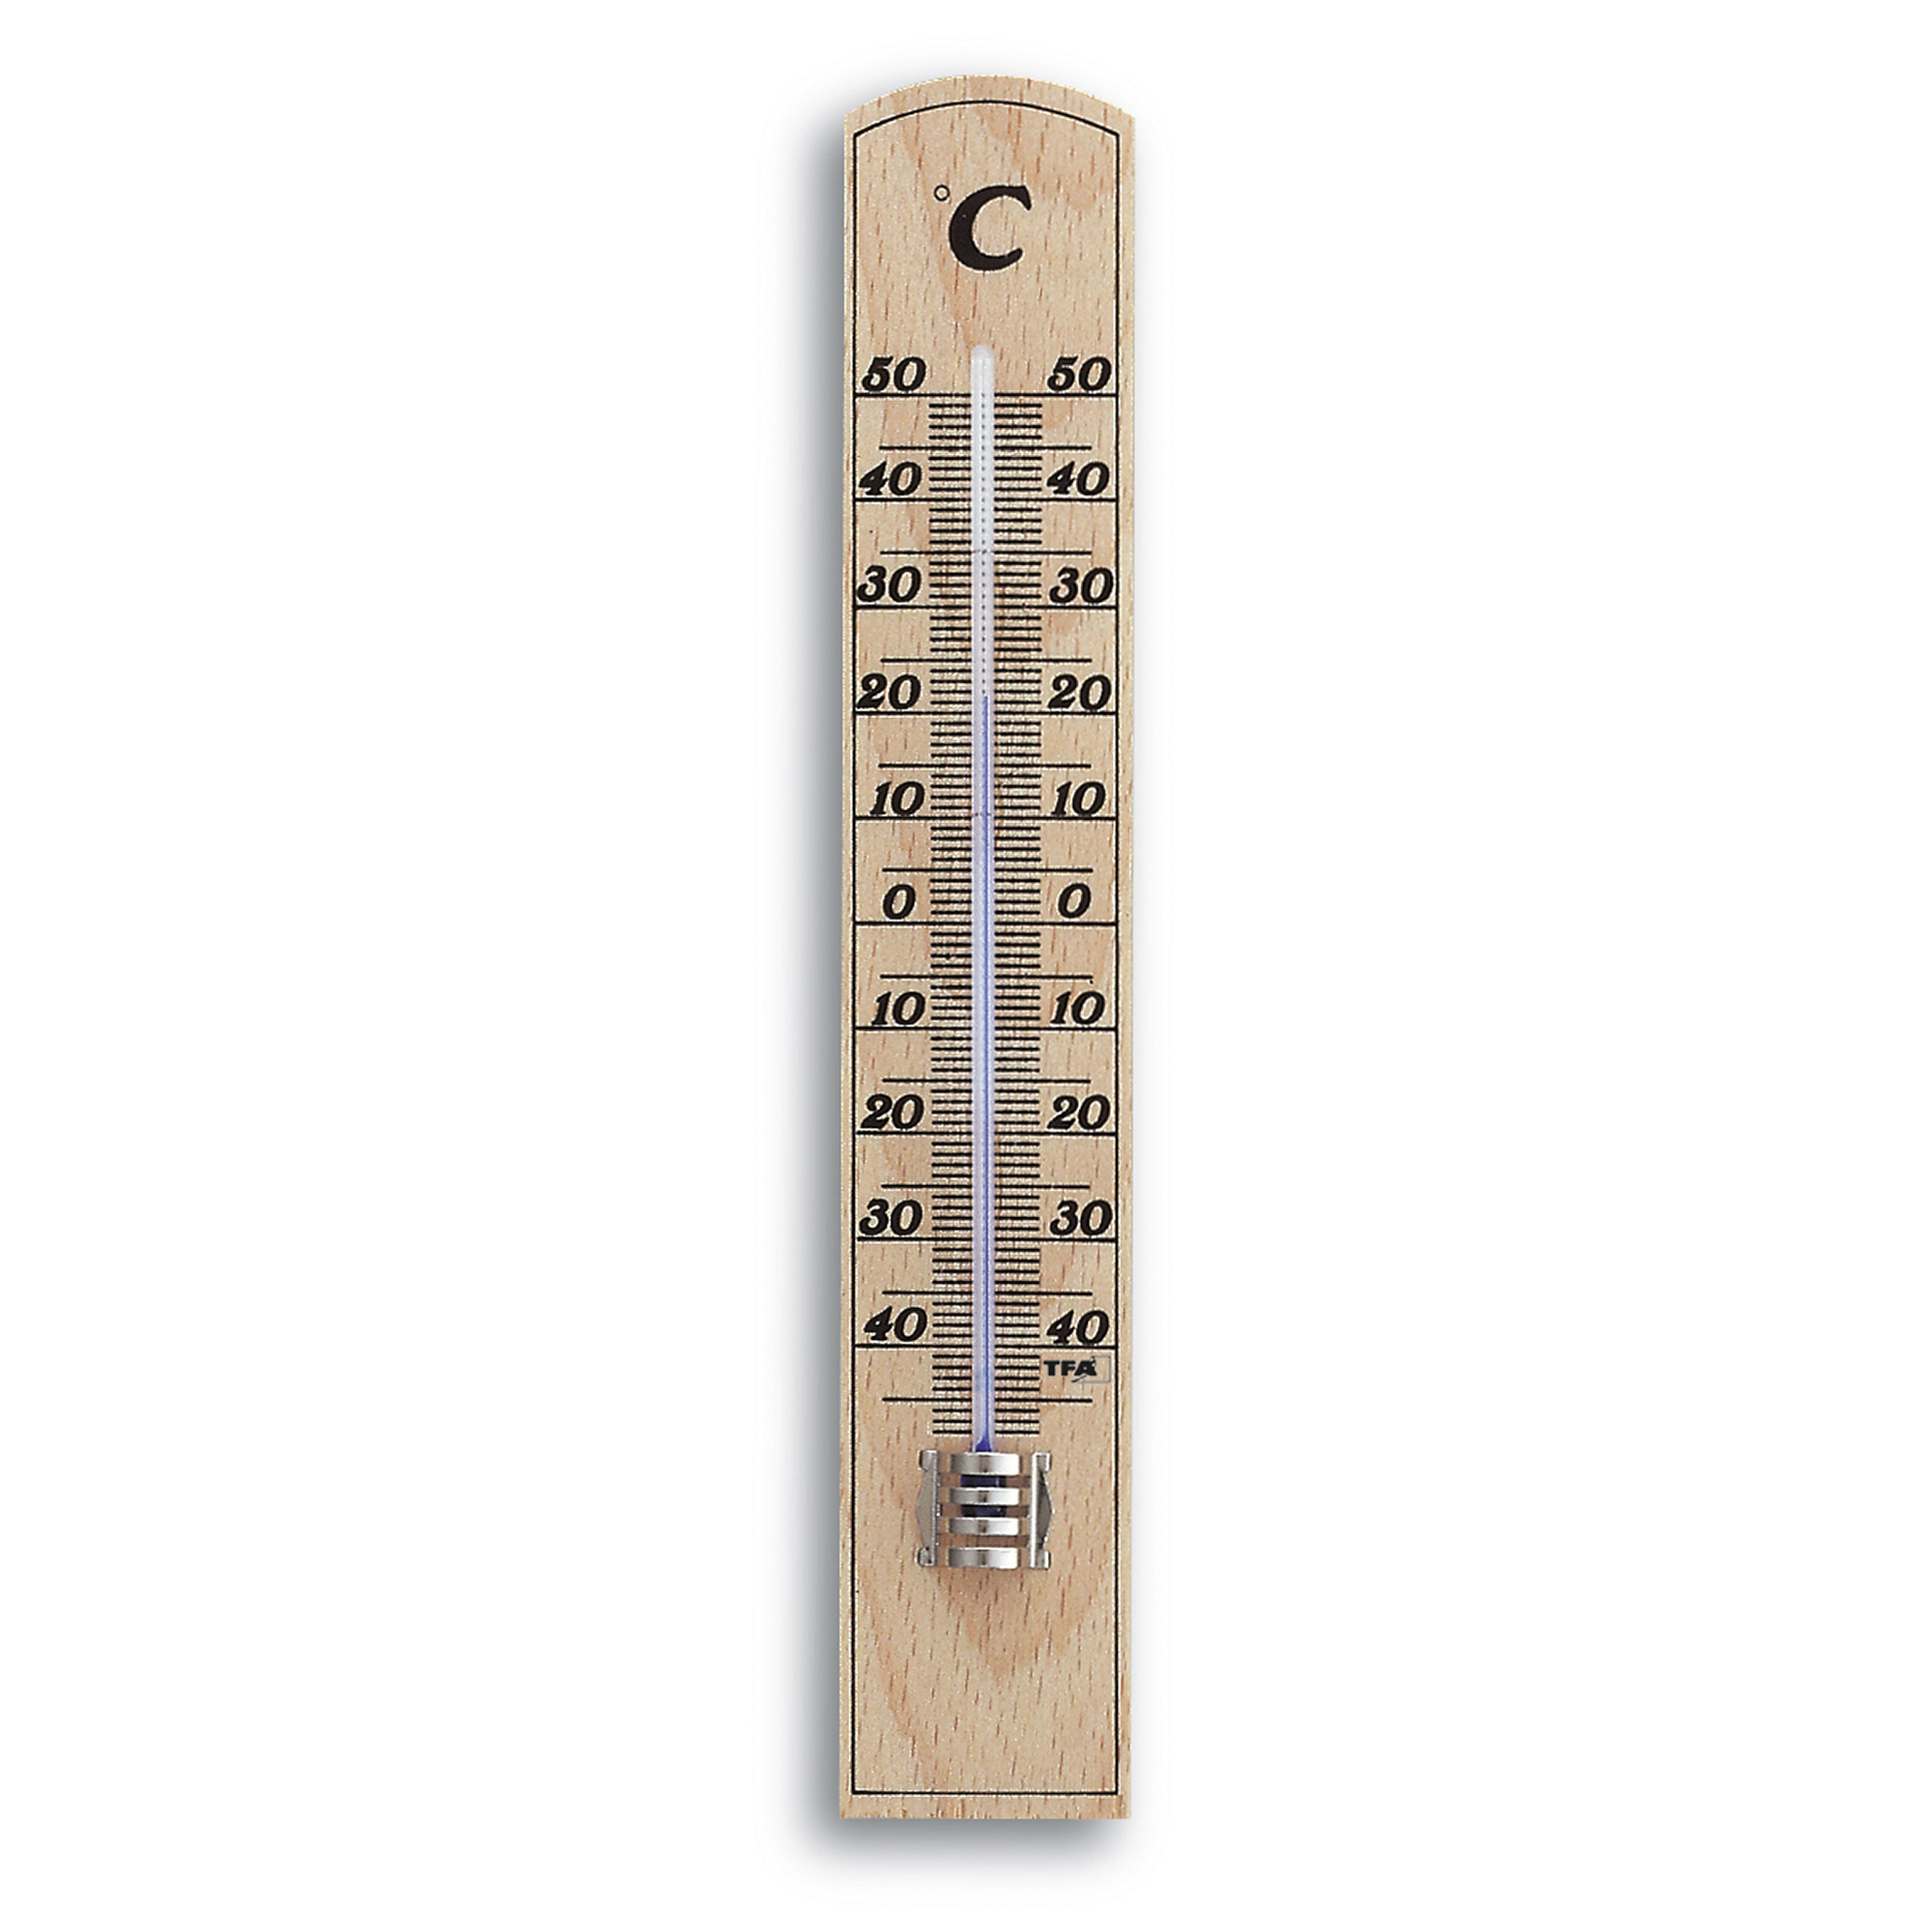 Analogue indoor thermometer made of beech